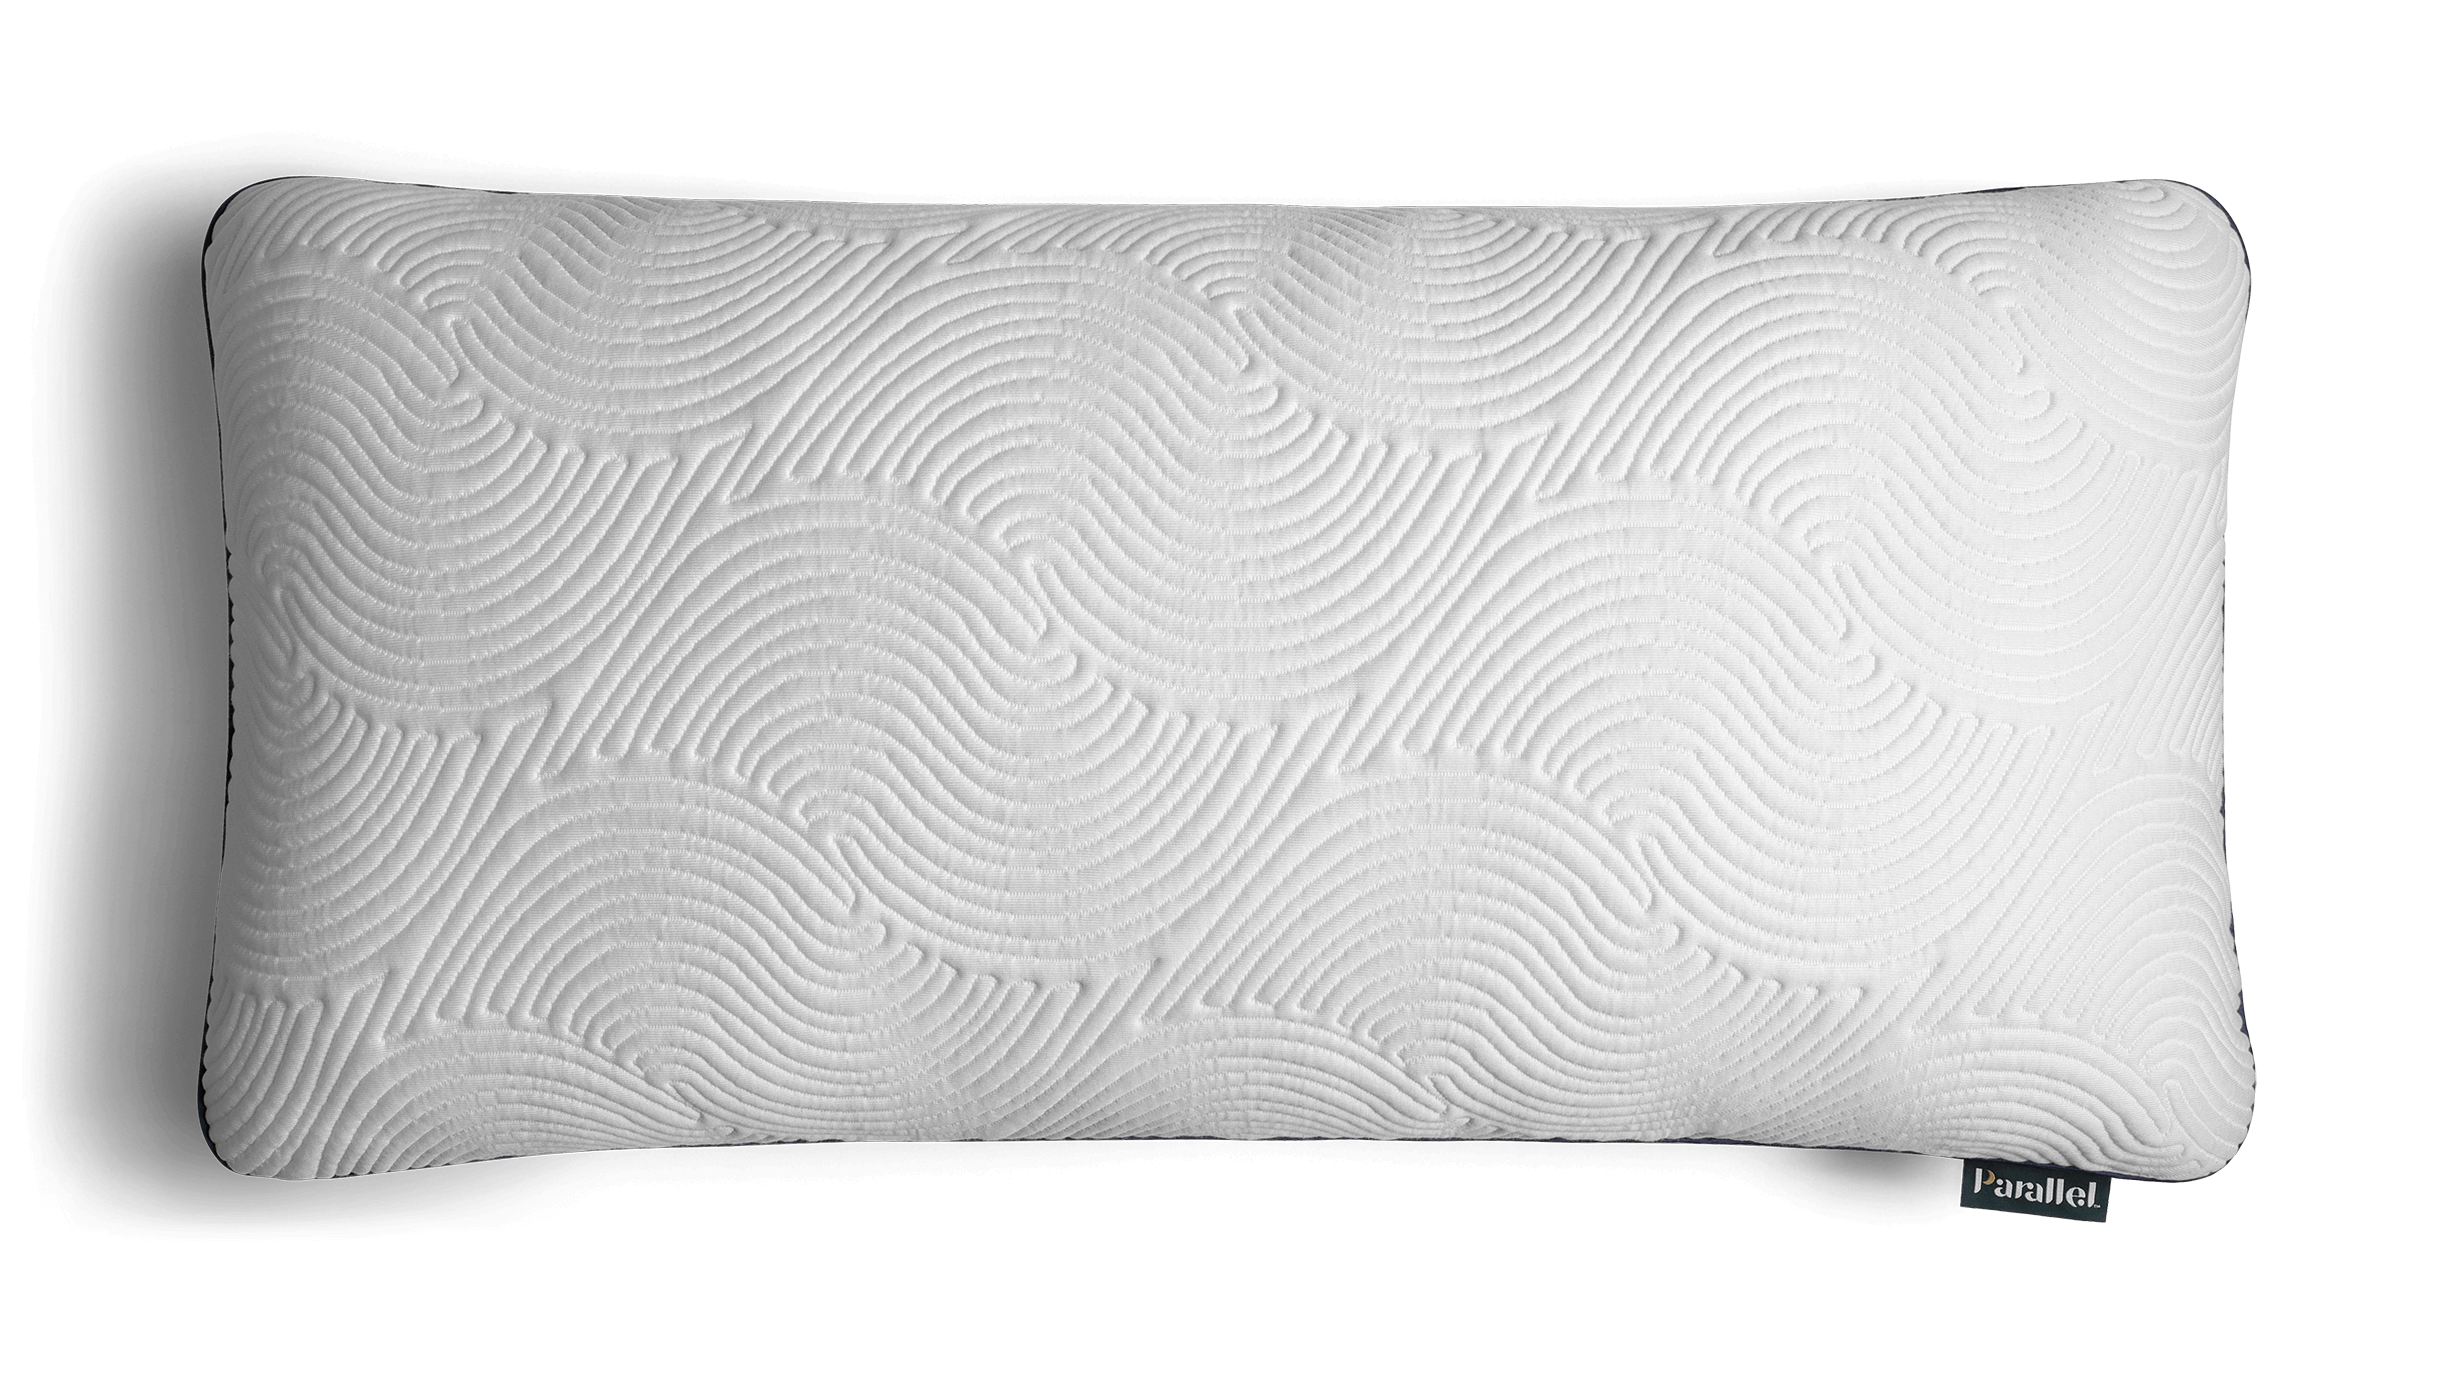 Low Profile King Size Parallel Pillow front top view